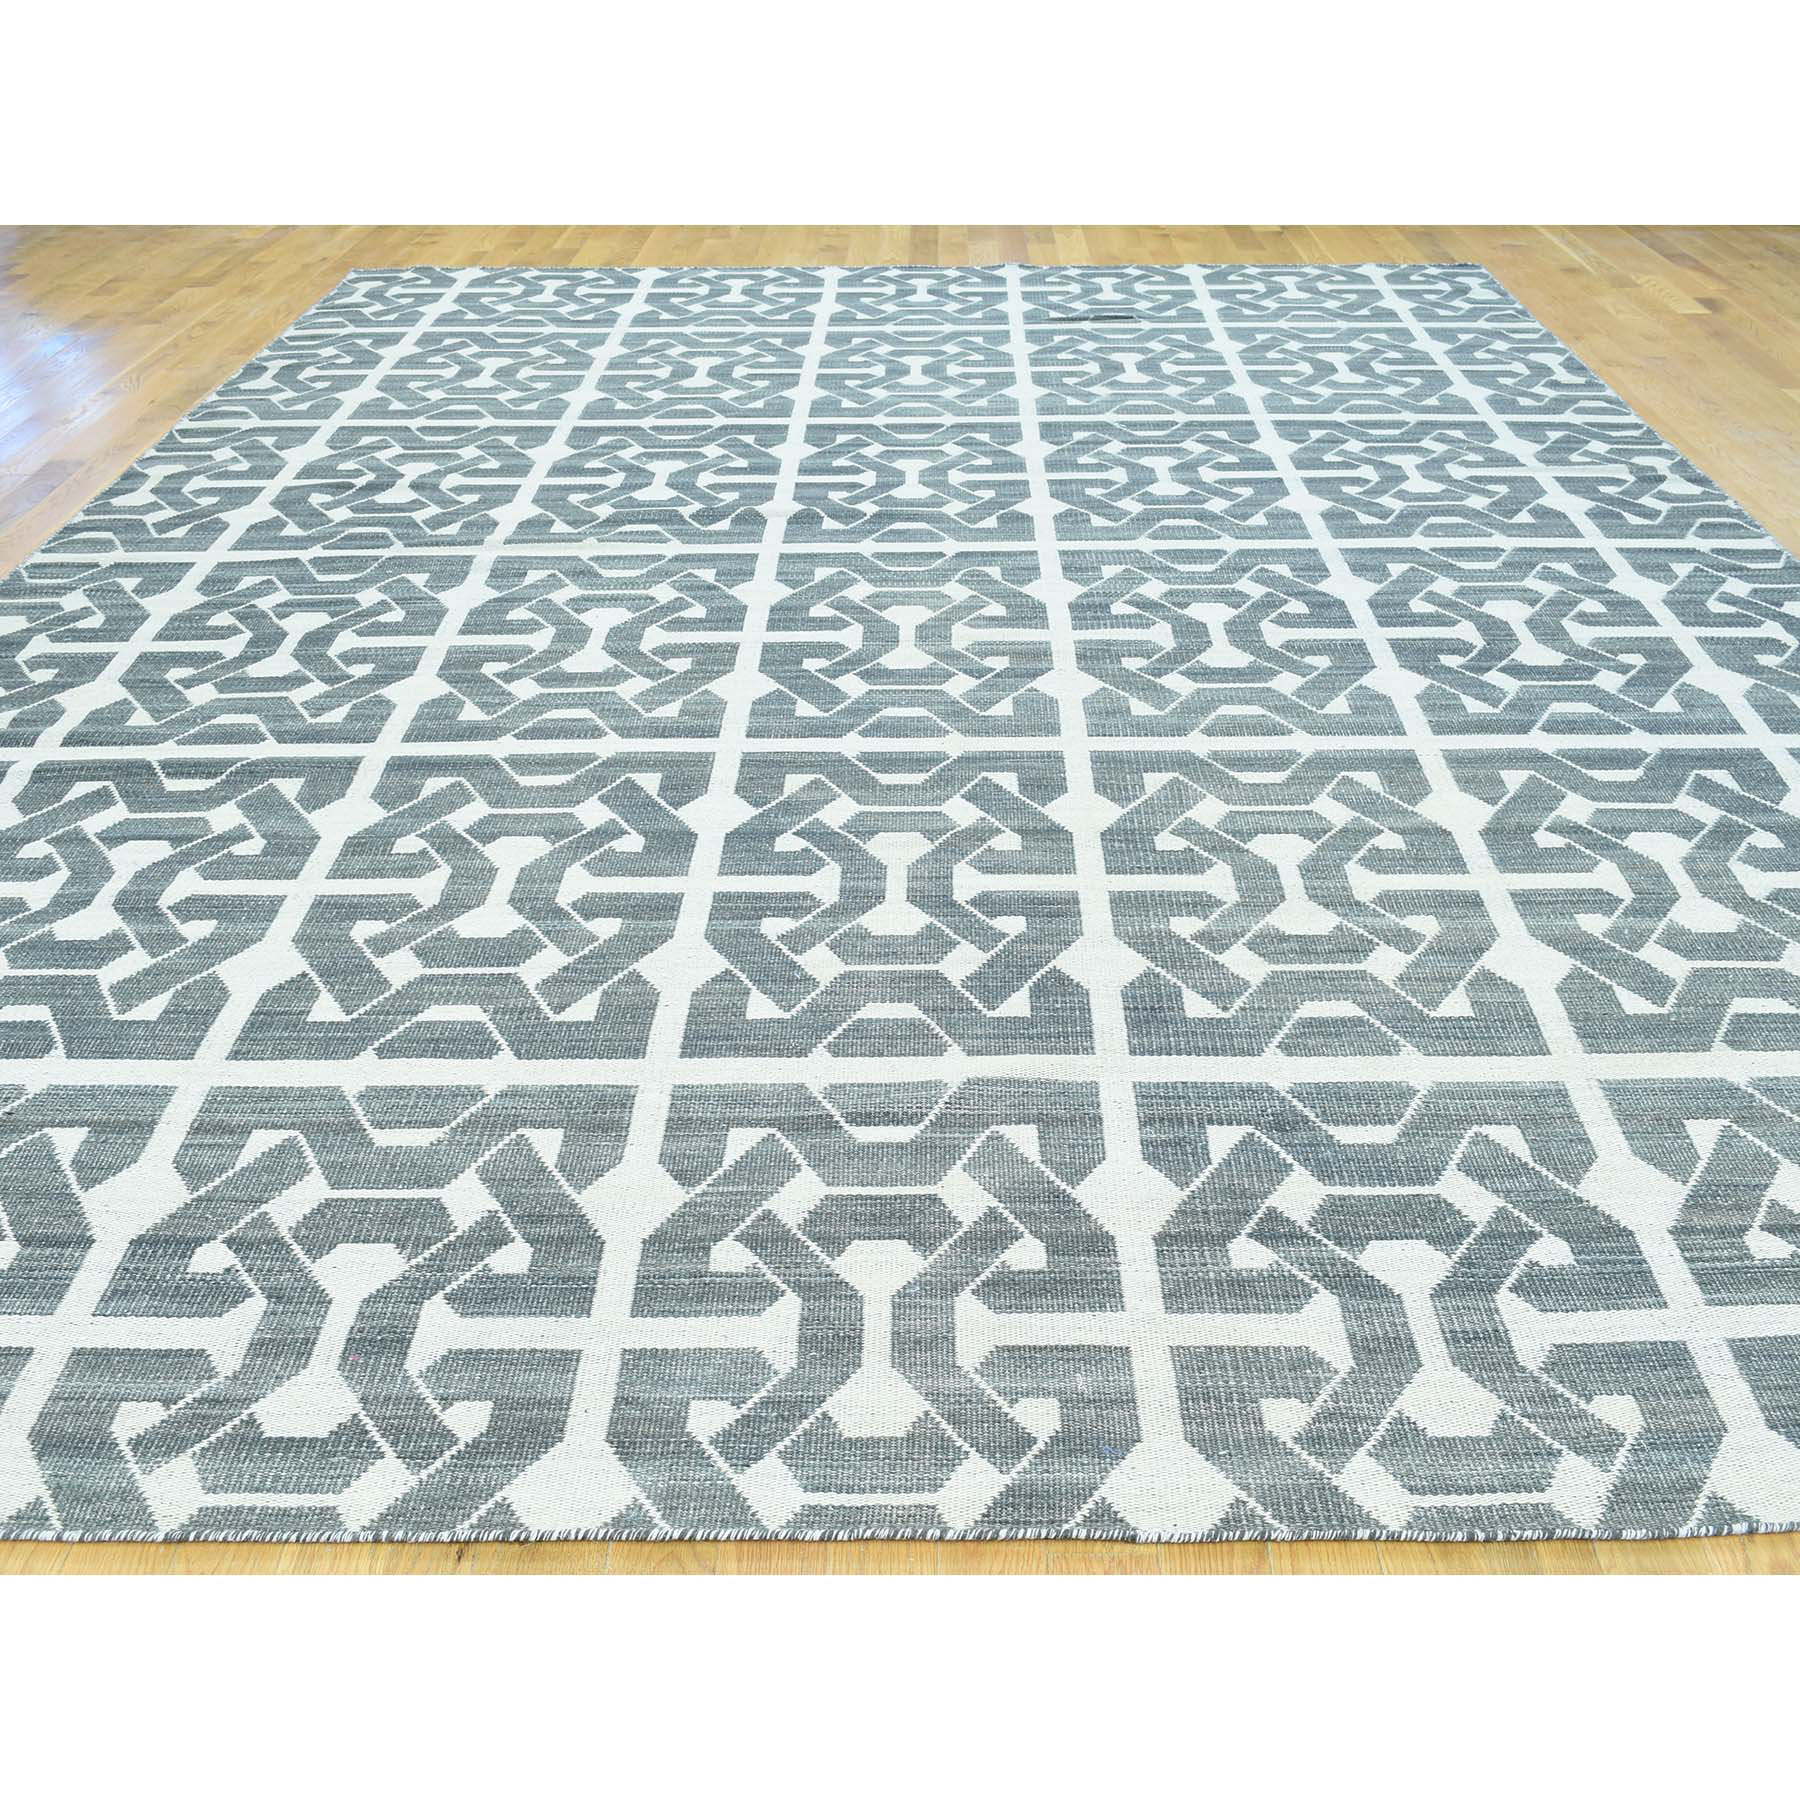 10'x13'10" Hand Woven Flat Weave Durie Kilim Reversible Oriental Rug 